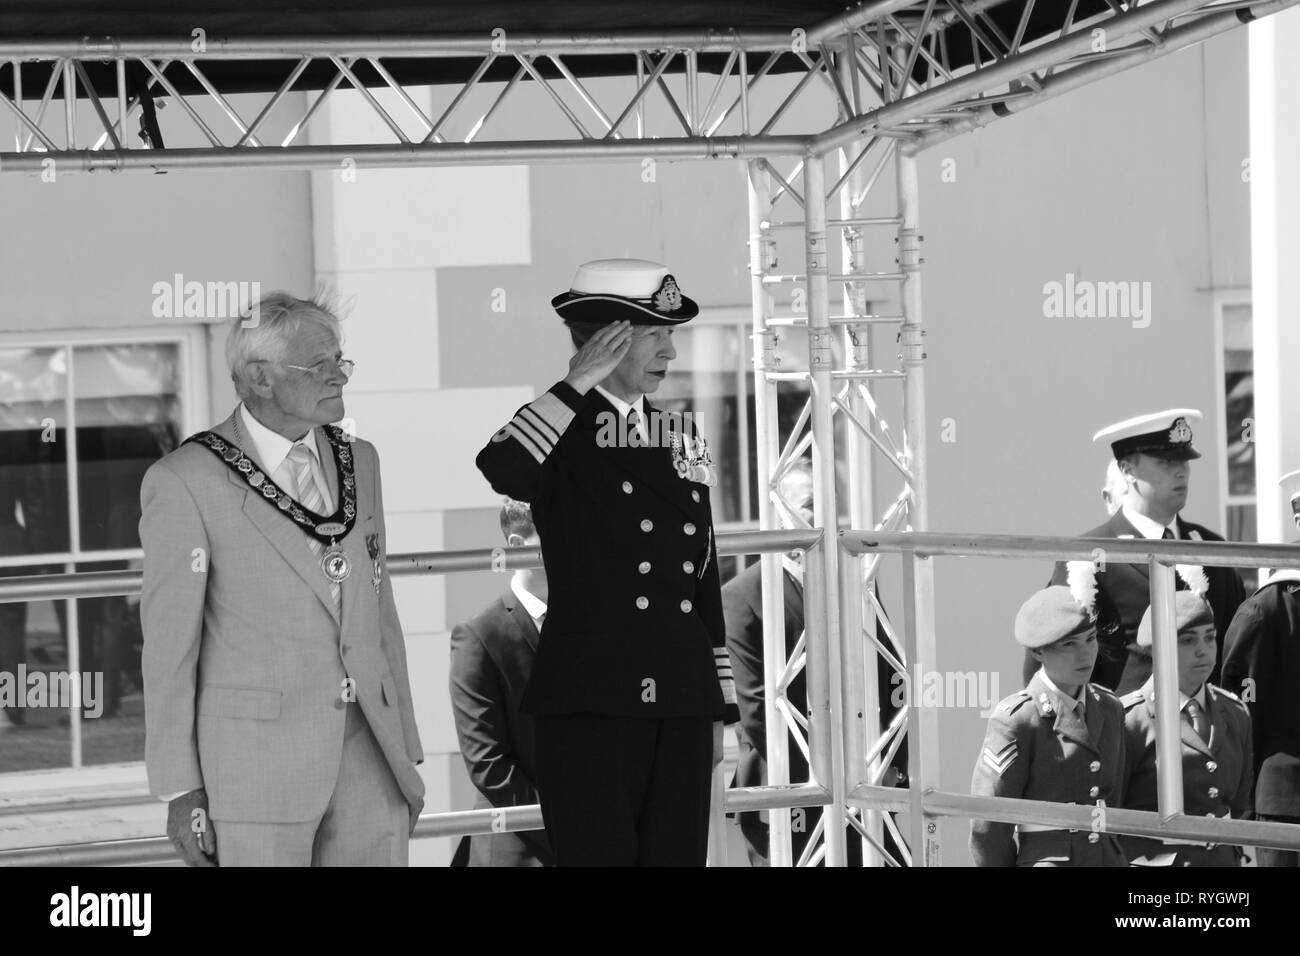 Anne Princess Royal attending Armed Forces Day Llandudno, Wales UK Stock Photo